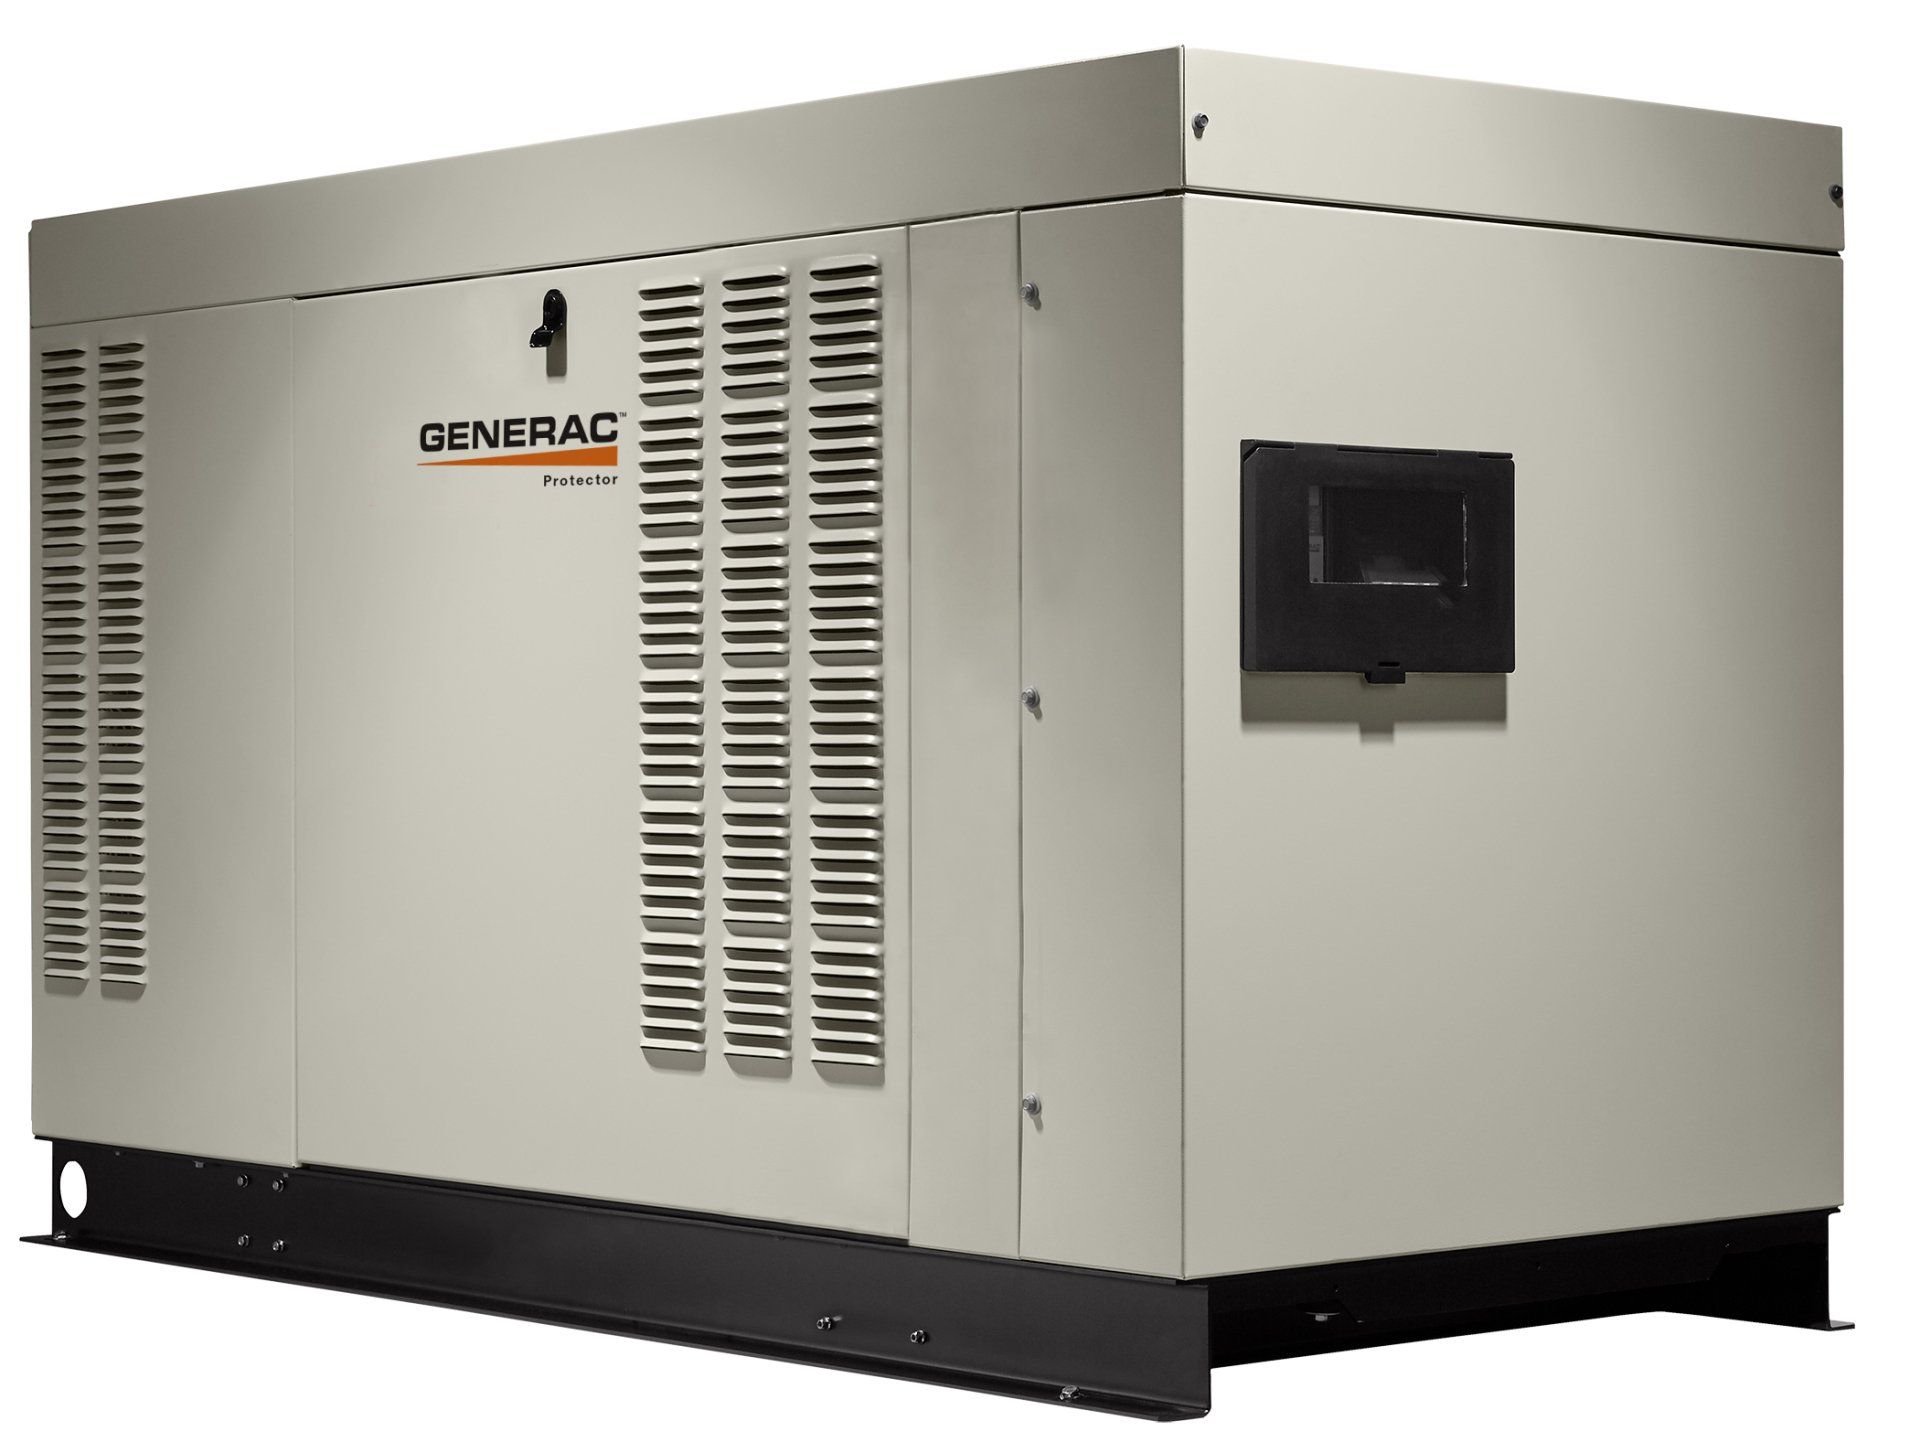 a genpac generator is shown on a white background